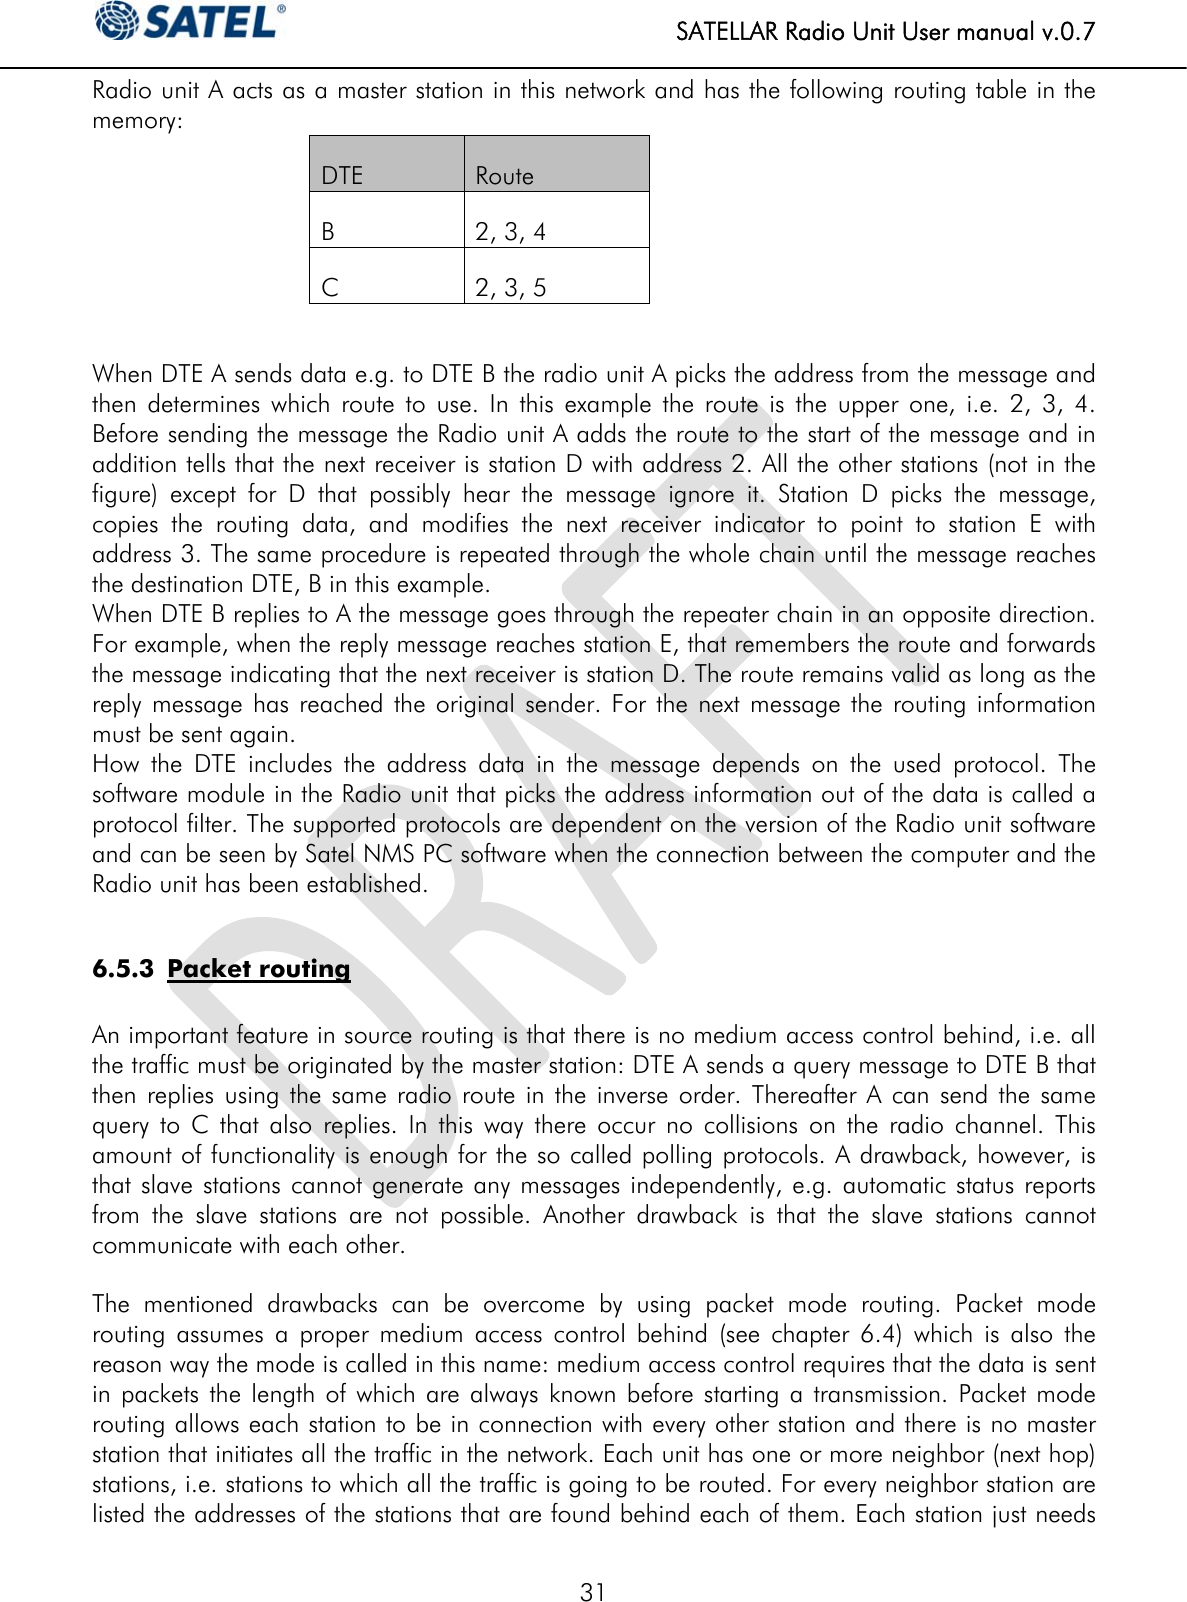   SATELLAR Radio Unit User manual v.0.7  31 Radio unit A acts as a master station in this network and has the following routing table in the memory: DTE  Route B  2, 3, 4 C  2, 3, 5  When DTE A sends data e.g. to DTE B the radio unit A picks the address from the message and then determines which route to use. In this example the route is the upper one, i.e. 2, 3, 4. Before sending the message the Radio unit A adds the route to the start of the message and in addition tells that the next receiver is station D with address 2. All the other stations (not in the figure) except for D that possibly hear the message ignore it. Station D picks the message, copies the routing data, and modifies the next receiver indicator to point to station E with address 3. The same procedure is repeated through the whole chain until the message reaches the destination DTE, B in this example. When DTE B replies to A the message goes through the repeater chain in an opposite direction. For example, when the reply message reaches station E, that remembers the route and forwards the message indicating that the next receiver is station D. The route remains valid as long as the reply message has reached the original sender. For the next message the routing information must be sent again. How the DTE includes the address data in the message depends on the used protocol. The software module in the Radio unit that picks the address information out of the data is called a protocol filter. The supported protocols are dependent on the version of the Radio unit software and can be seen by Satel NMS PC software when the connection between the computer and the Radio unit has been established.  6.5.3 Packet routing  An important feature in source routing is that there is no medium access control behind, i.e. all the traffic must be originated by the master station: DTE A sends a query message to DTE B that then replies using the same radio route in the inverse order. Thereafter A can send the same query to C that also replies. In this way there occur no collisions on the radio channel. This amount of functionality is enough for the so called polling protocols. A drawback, however, is that slave stations cannot generate any messages independently, e.g. automatic status reports from the slave stations are not possible. Another drawback is that the slave stations cannot communicate with each other.  The mentioned drawbacks can be overcome by using packet mode routing. Packet mode routing assumes a proper medium access control behind (see chapter 6.4) which is also the reason way the mode is called in this name: medium access control requires that the data is sent in packets the length of which are always known before starting a transmission. Packet mode routing allows each station to be in connection with every other station and there is no master station that initiates all the traffic in the network. Each unit has one or more neighbor (next hop) stations, i.e. stations to which all the traffic is going to be routed. For every neighbor station are listed the addresses of the stations that are found behind each of them. Each station just needs 